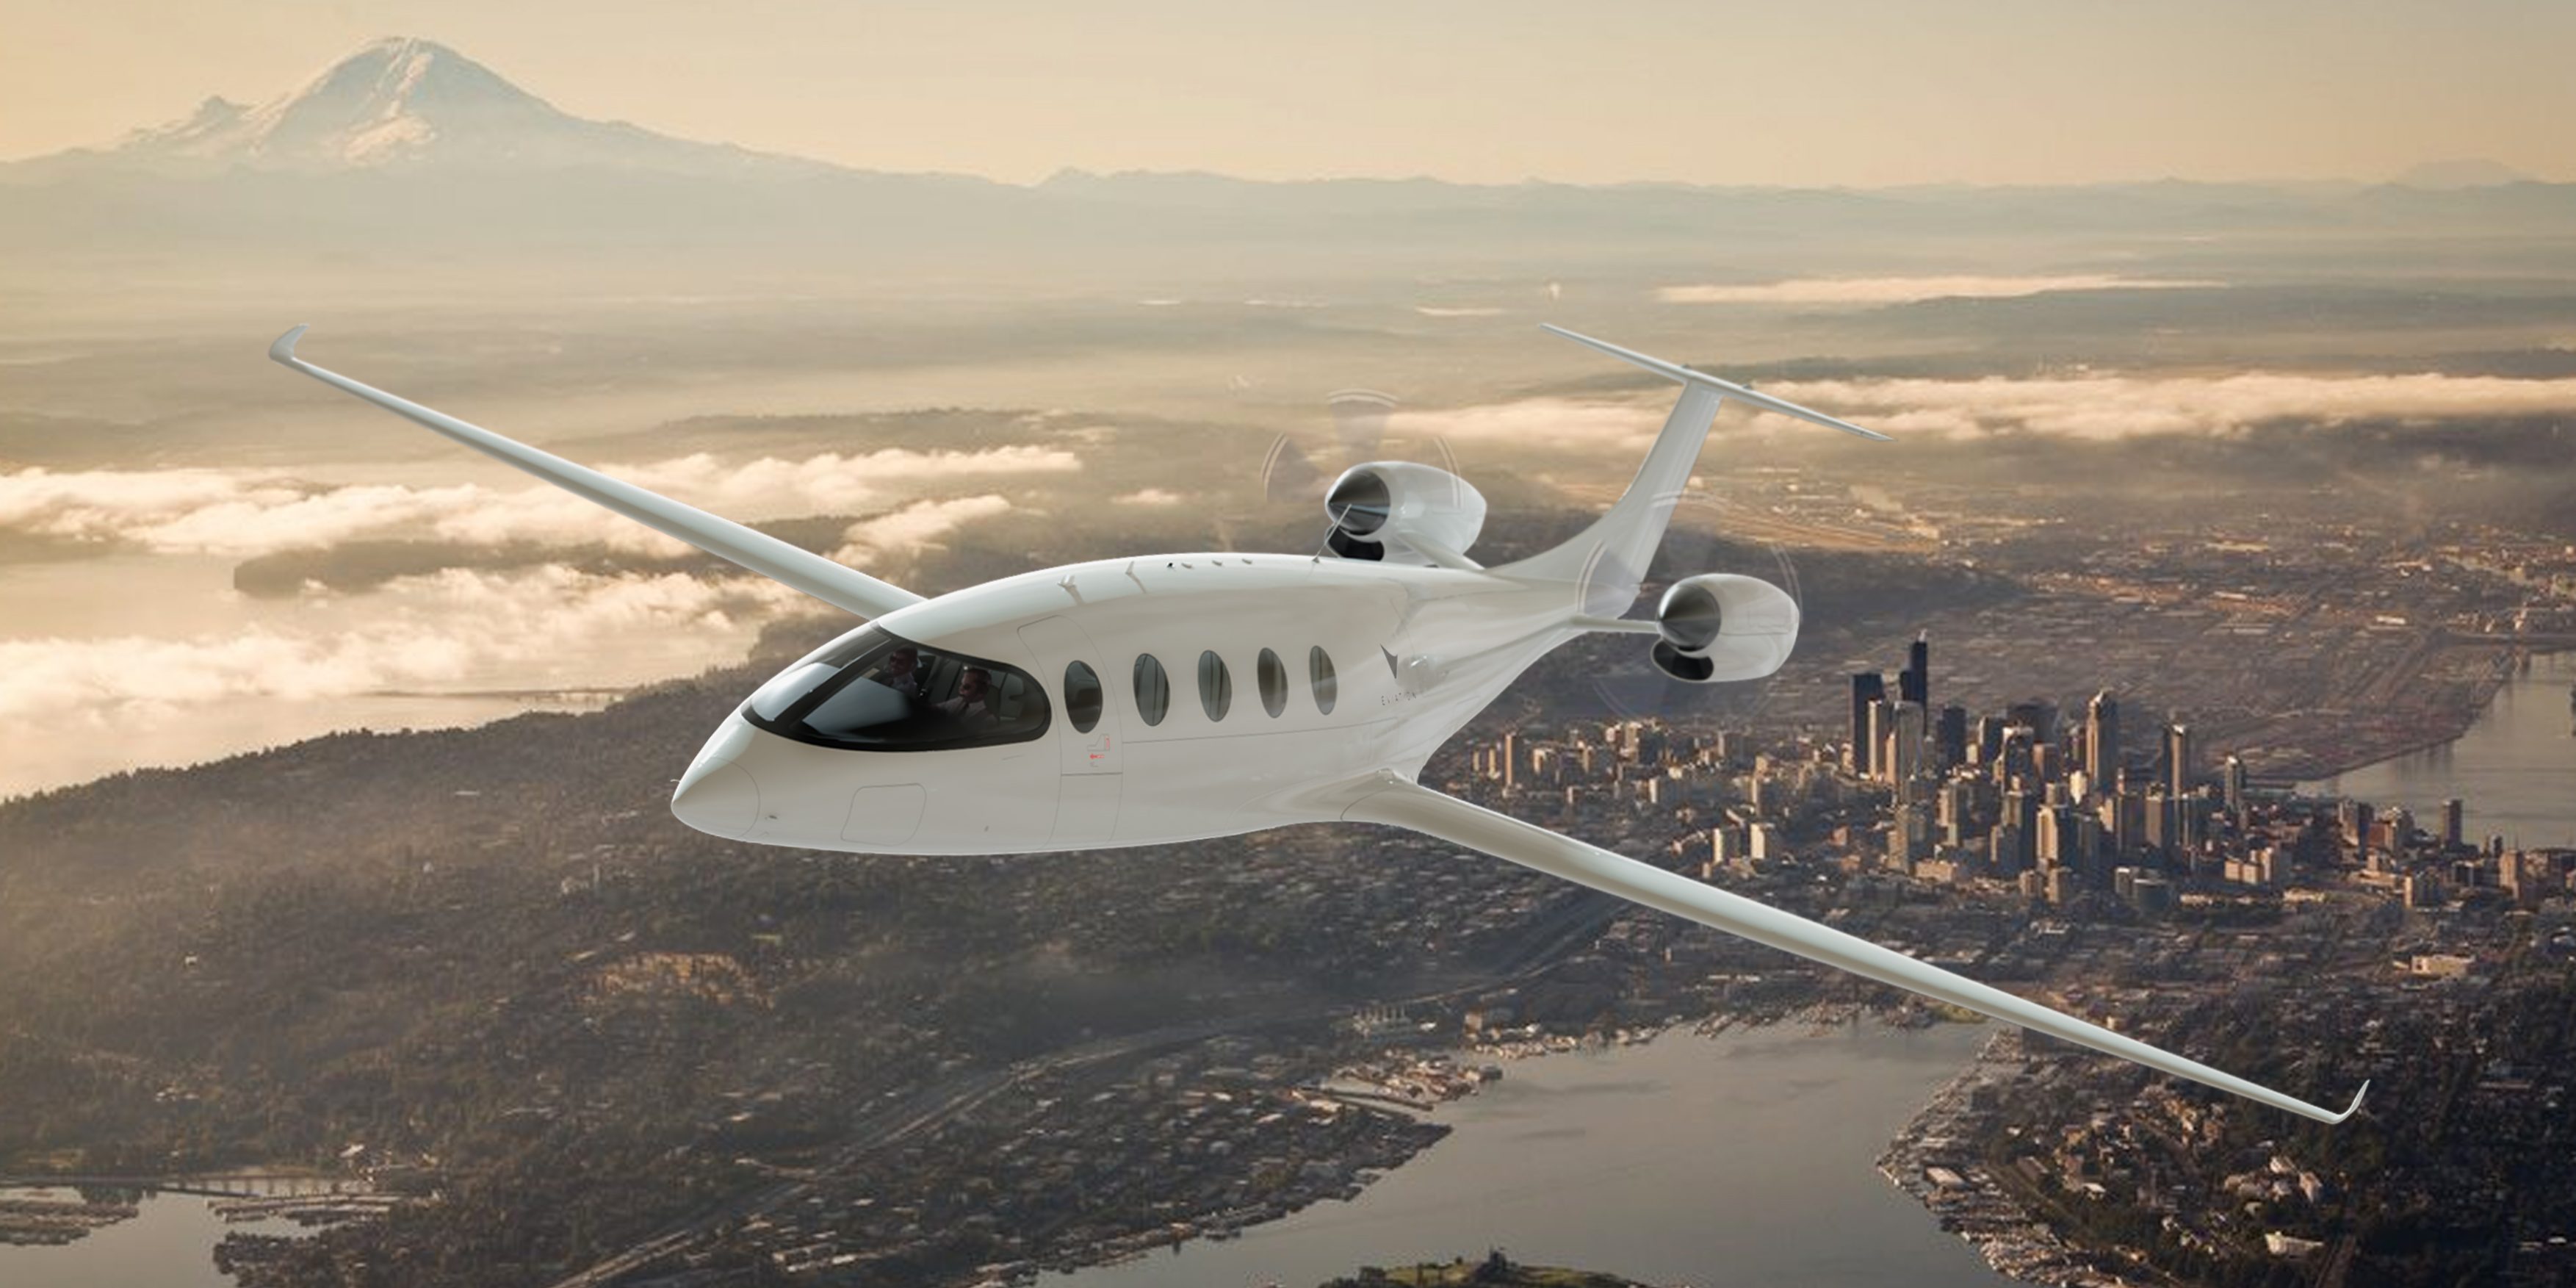 Eviation's 'Tesla of aircraft' production unveiled with over 400 miles | Electrek